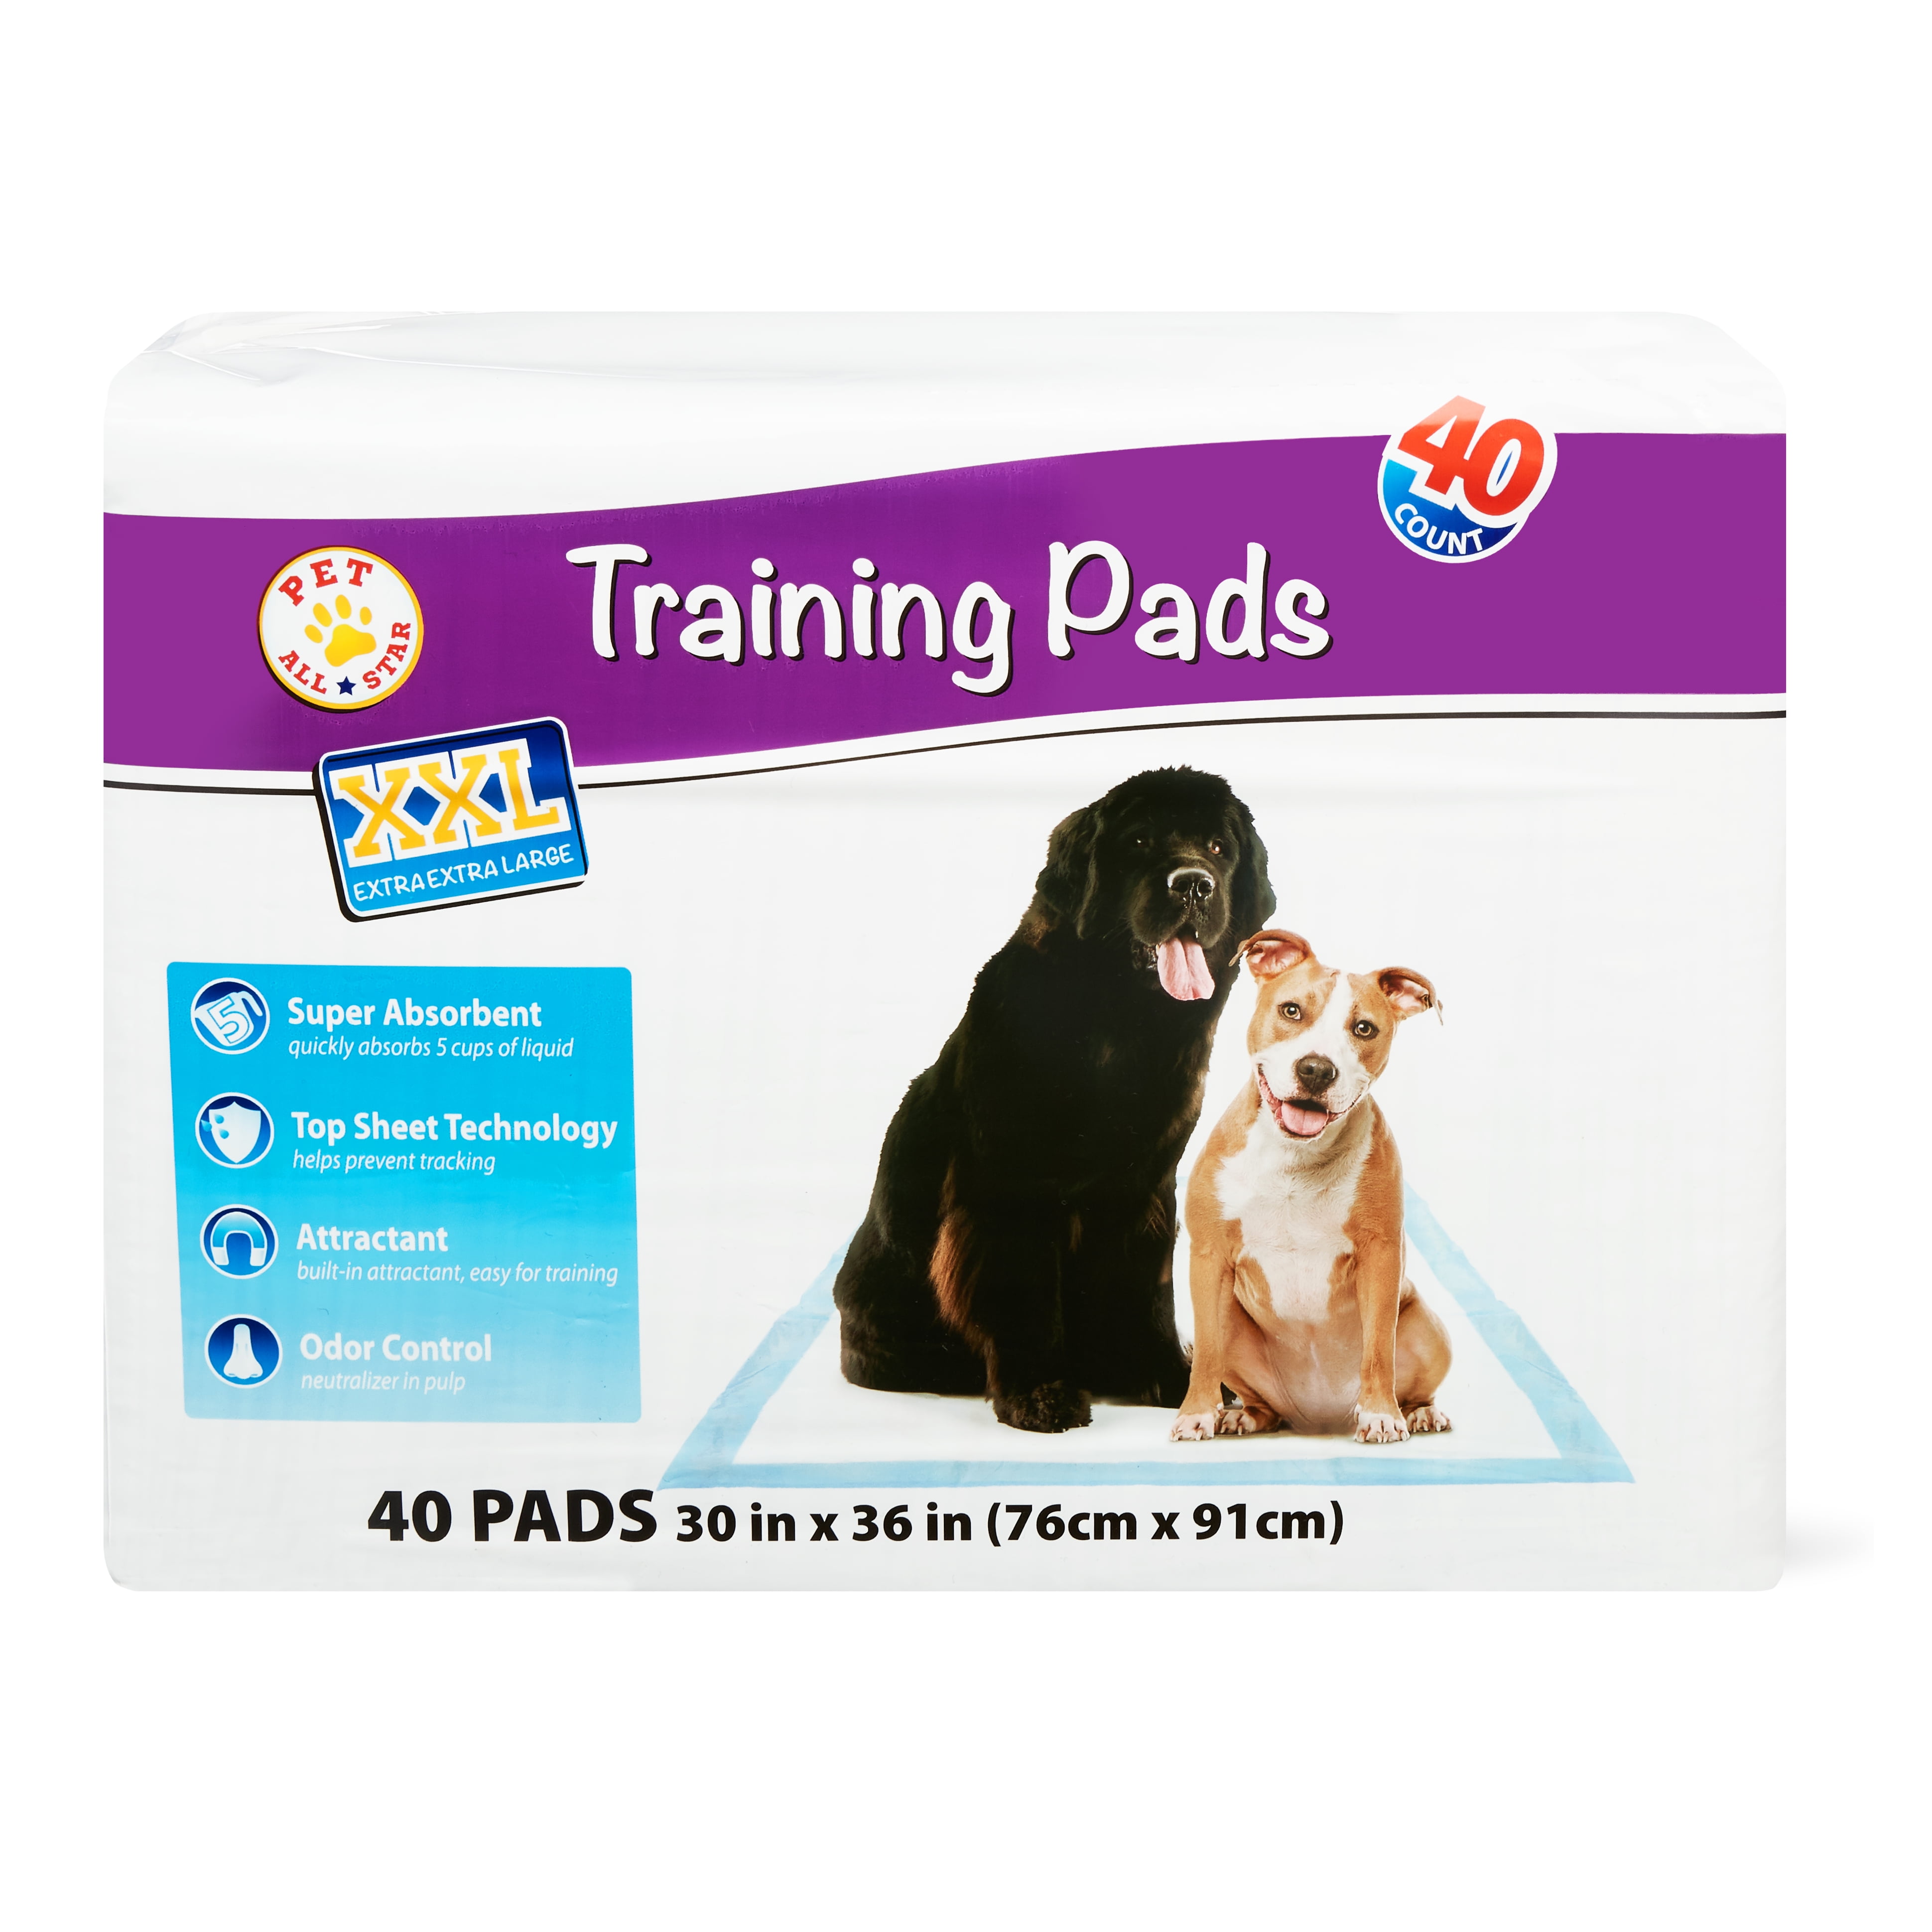 largest pee pads for dogs